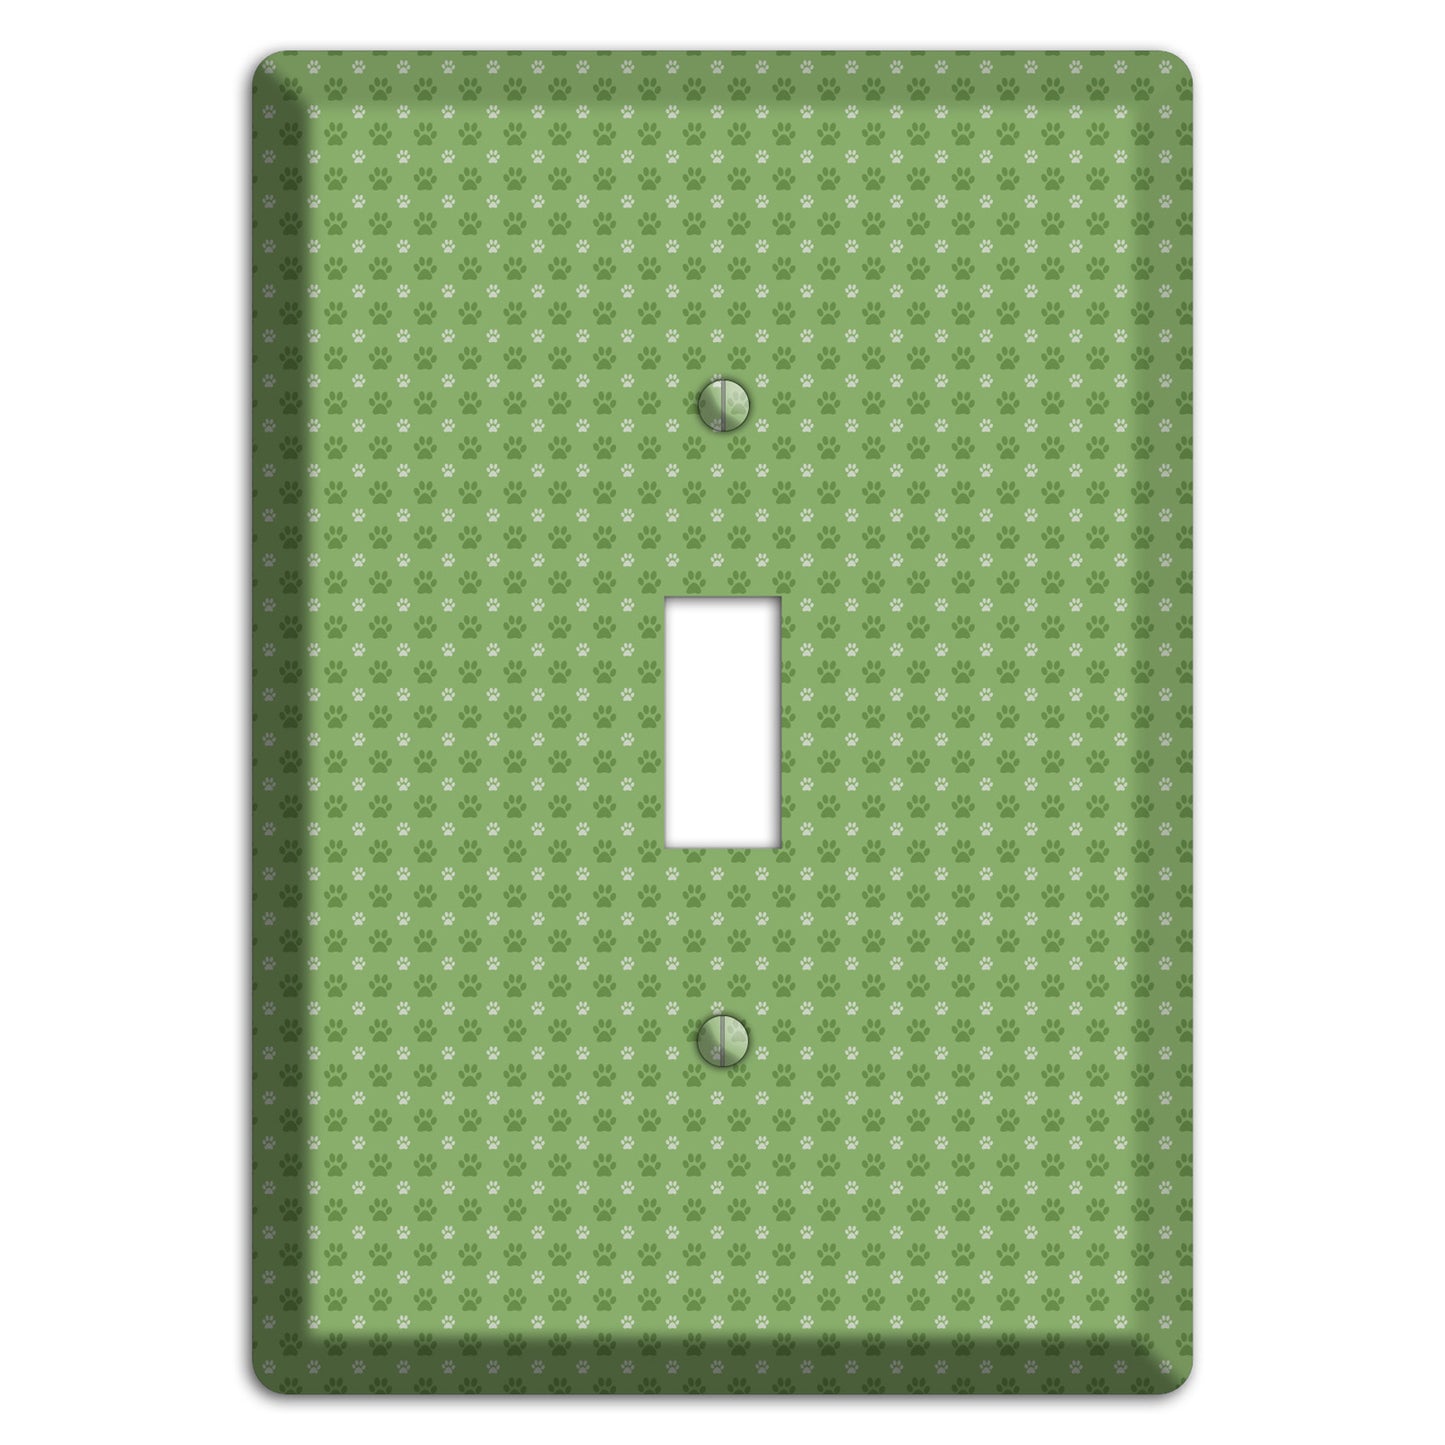 Green Paw Prints Cover Plates